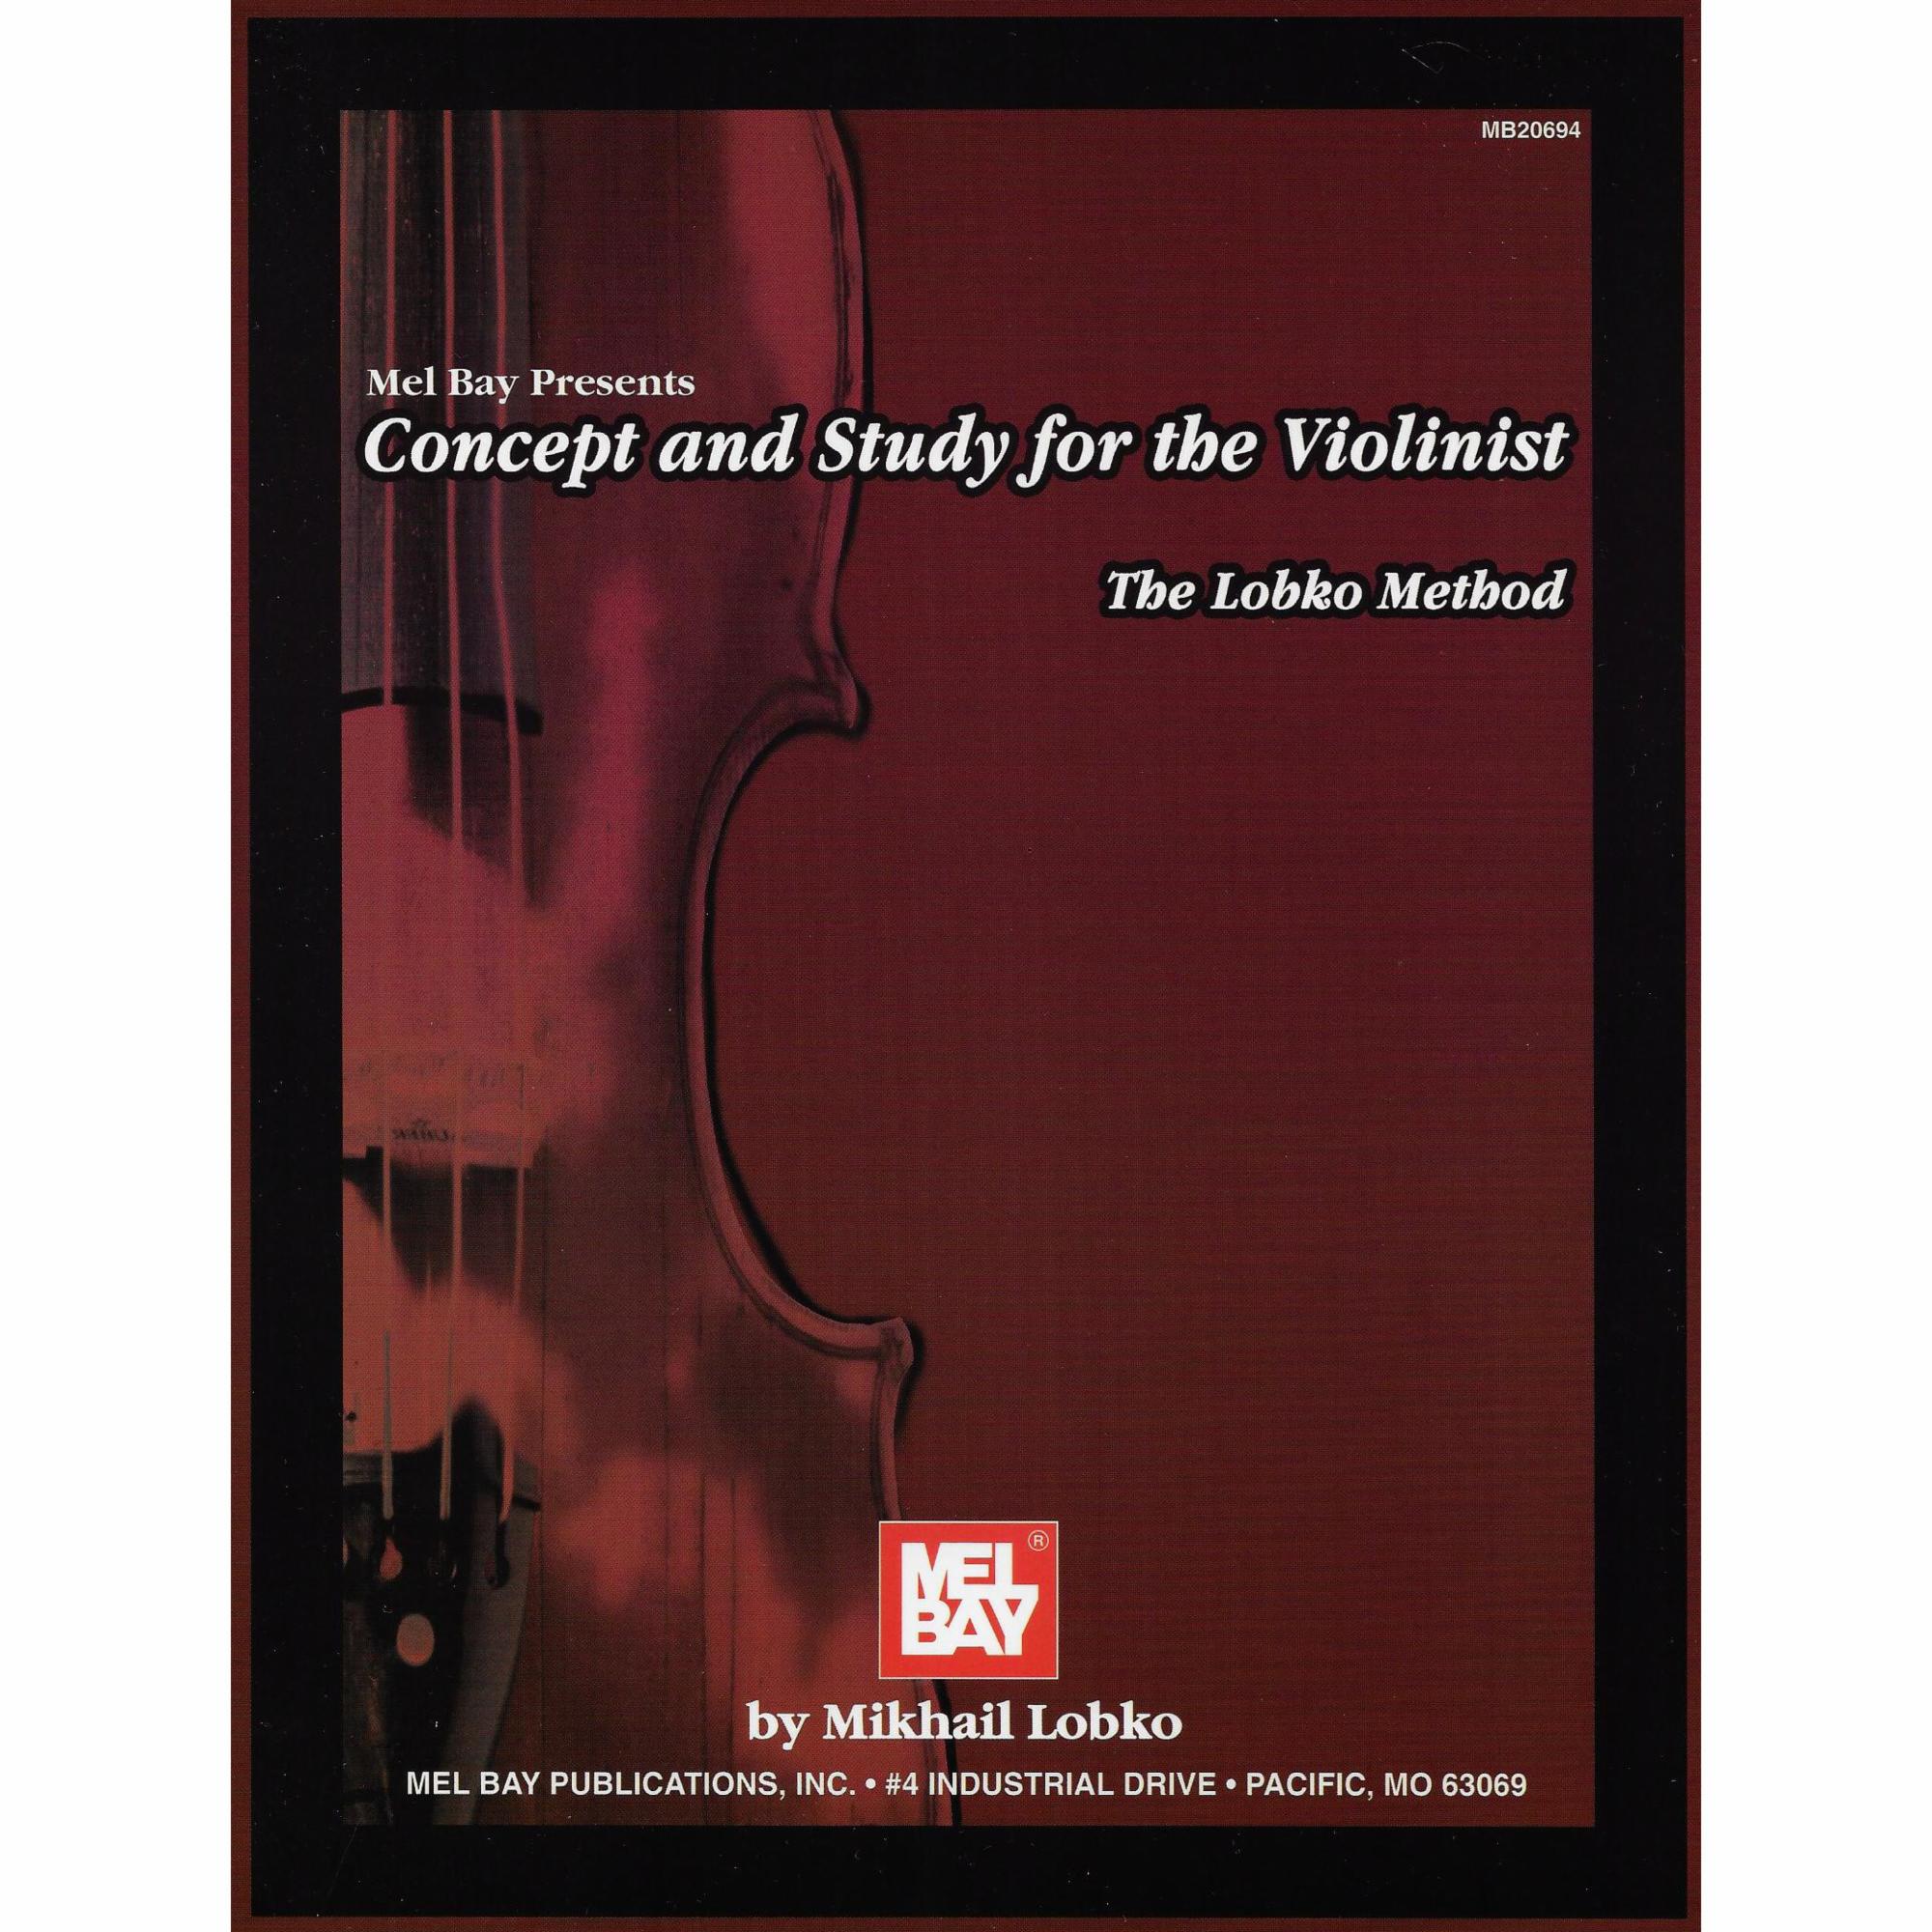 The Lobko Method: Concept and Study for the Violinist